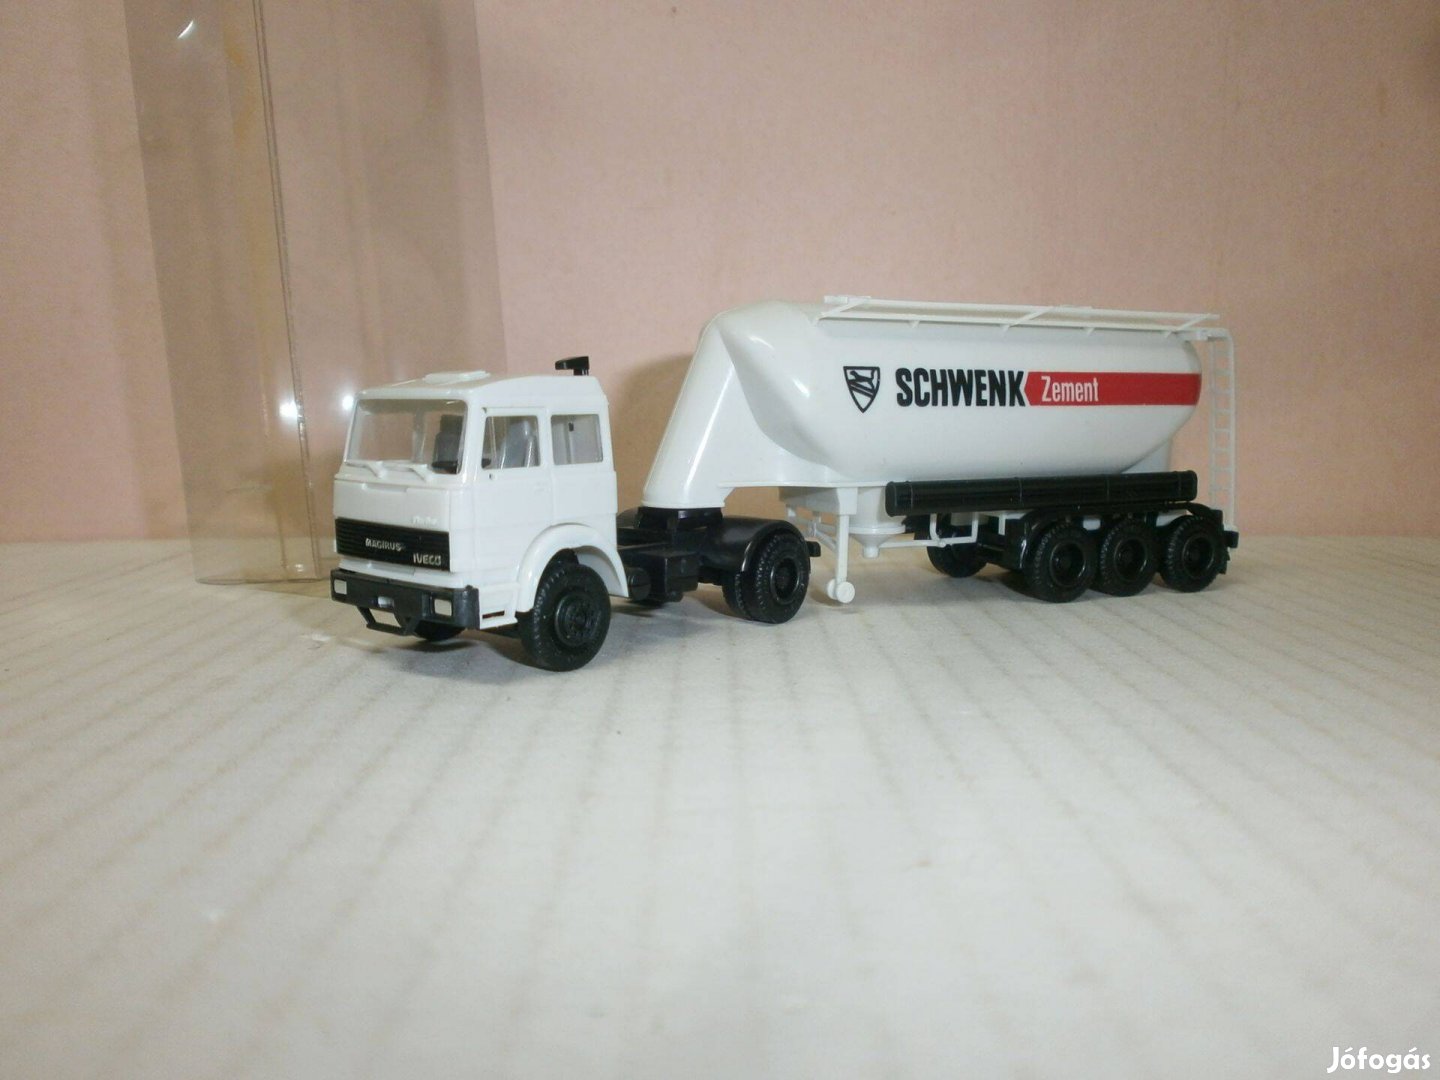 Herpa - Magirus -Iveco - "Silo" slepper kamion 1:87 - (H-110)